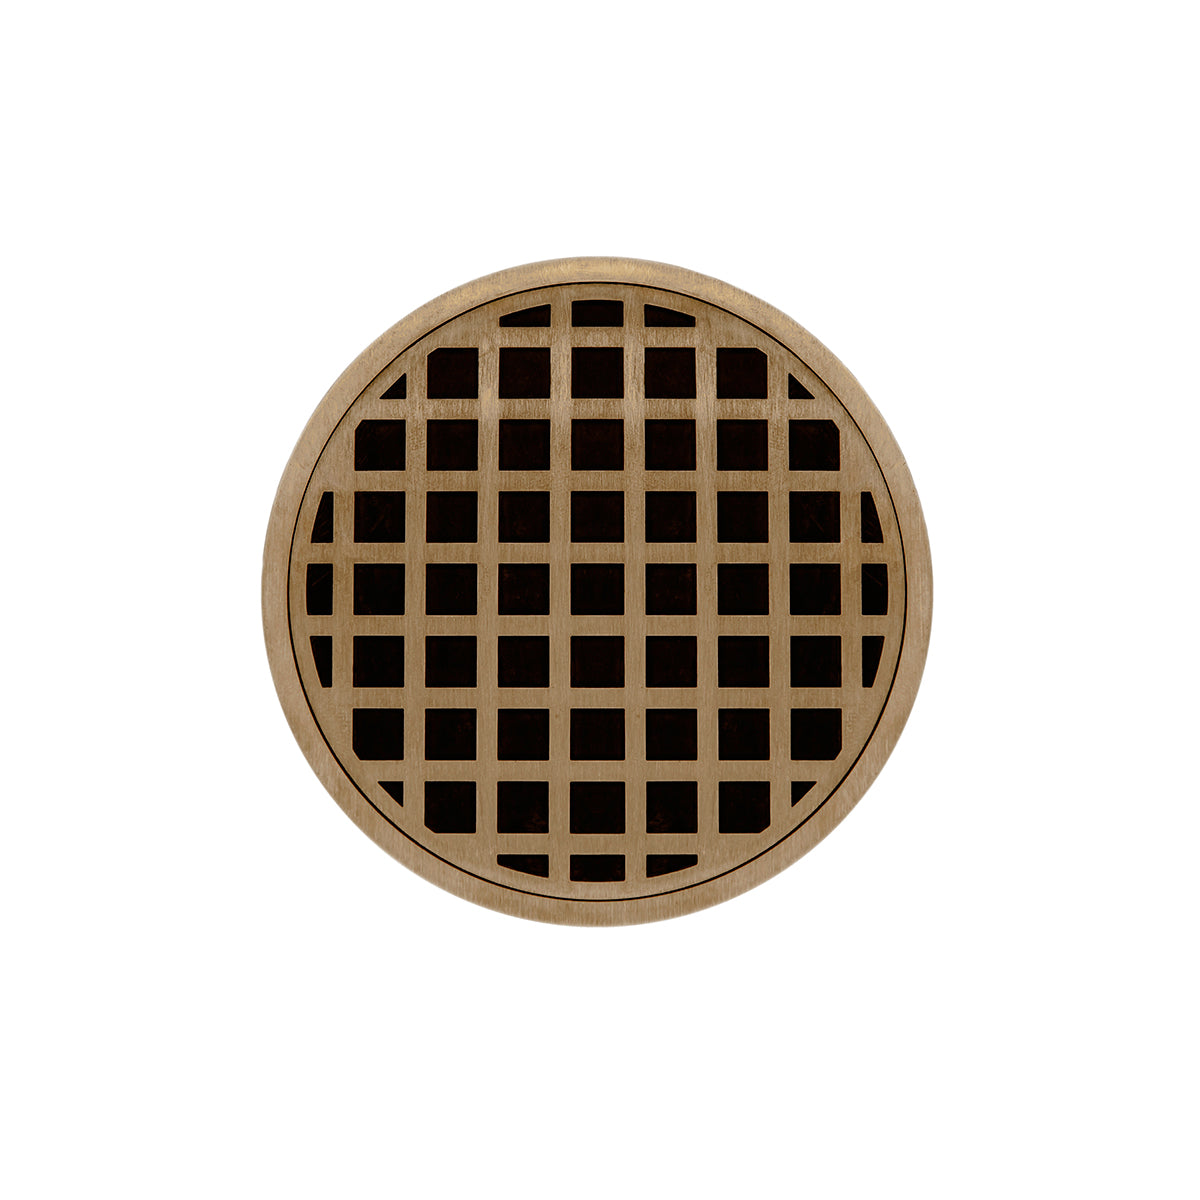 Infinity Drain 5" Round RQDB 5 Premium Center Drain Kit with Squares Pattern Decorative Plate with PVC Bonded Flange Drain Body, 2", 3" and 4" Outlet